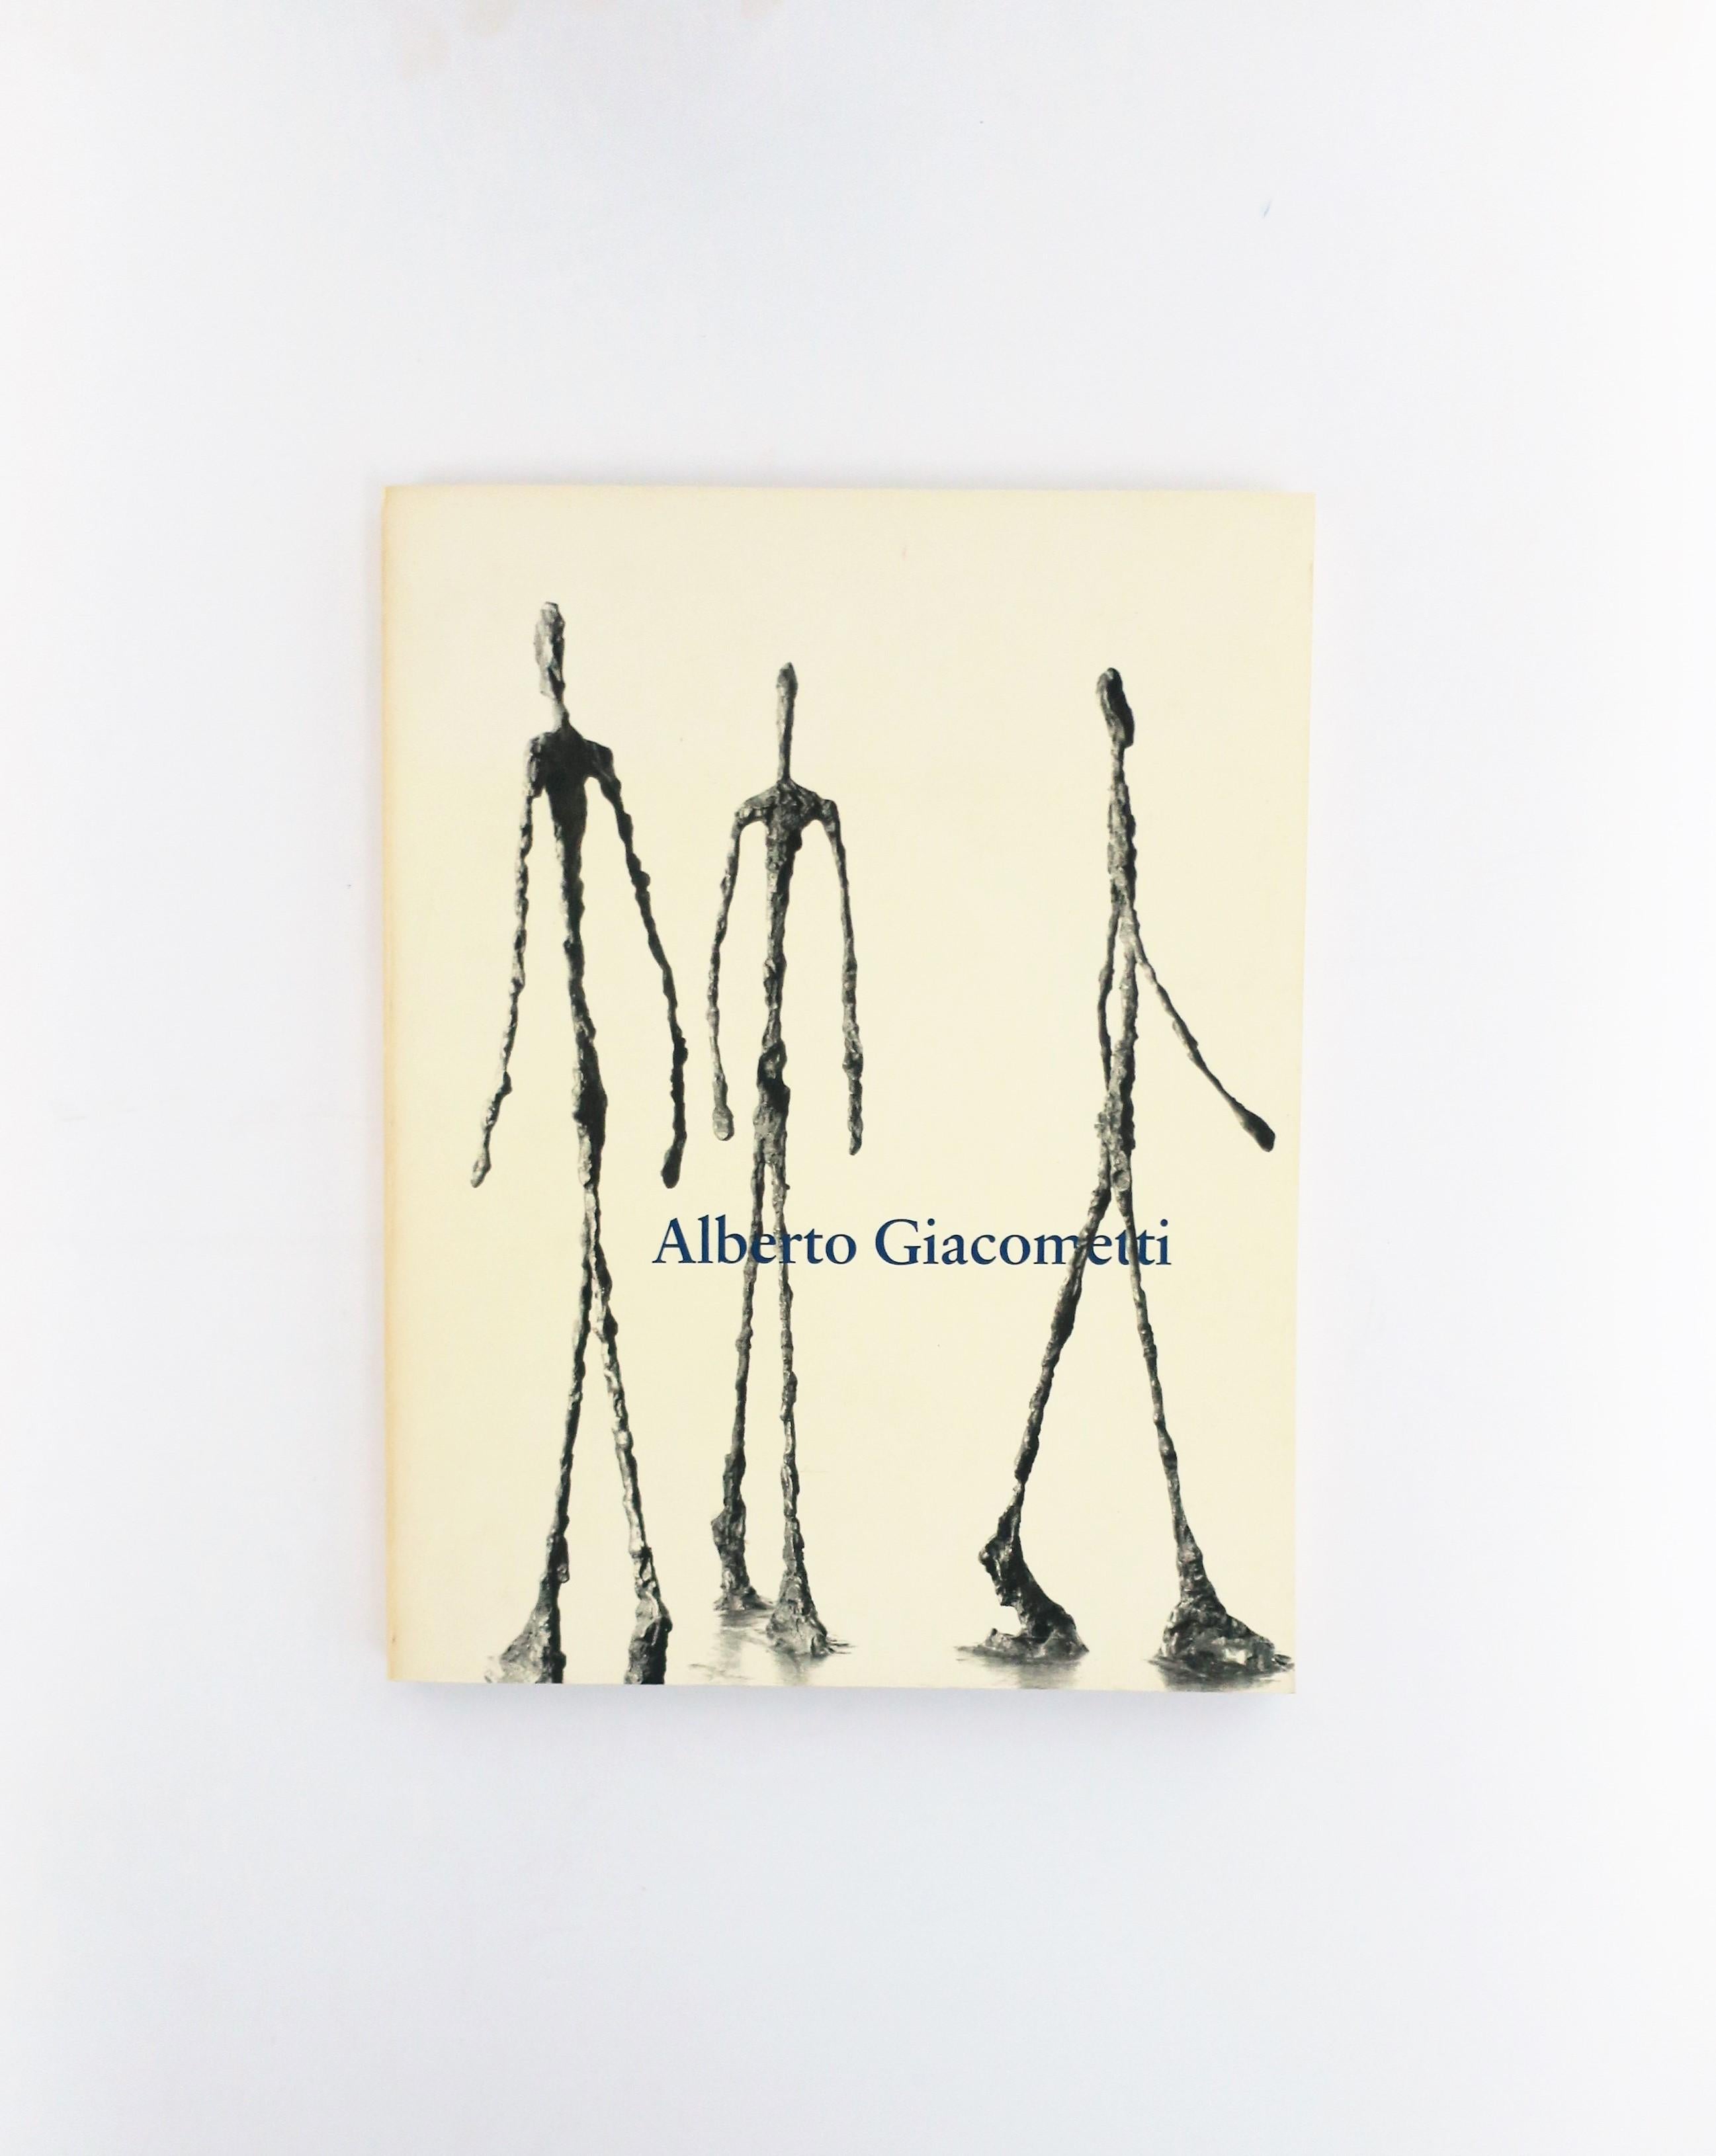 A rare Alberto Giacometti exhibition catalog book, published 1974, by the Solomon R. Guggenheim Foundation, New York, NY. Catalog was of an exhibition held April 5 - June 23, 1974 at the Solomon R. Guggenheim Museum, New York. A great addition to